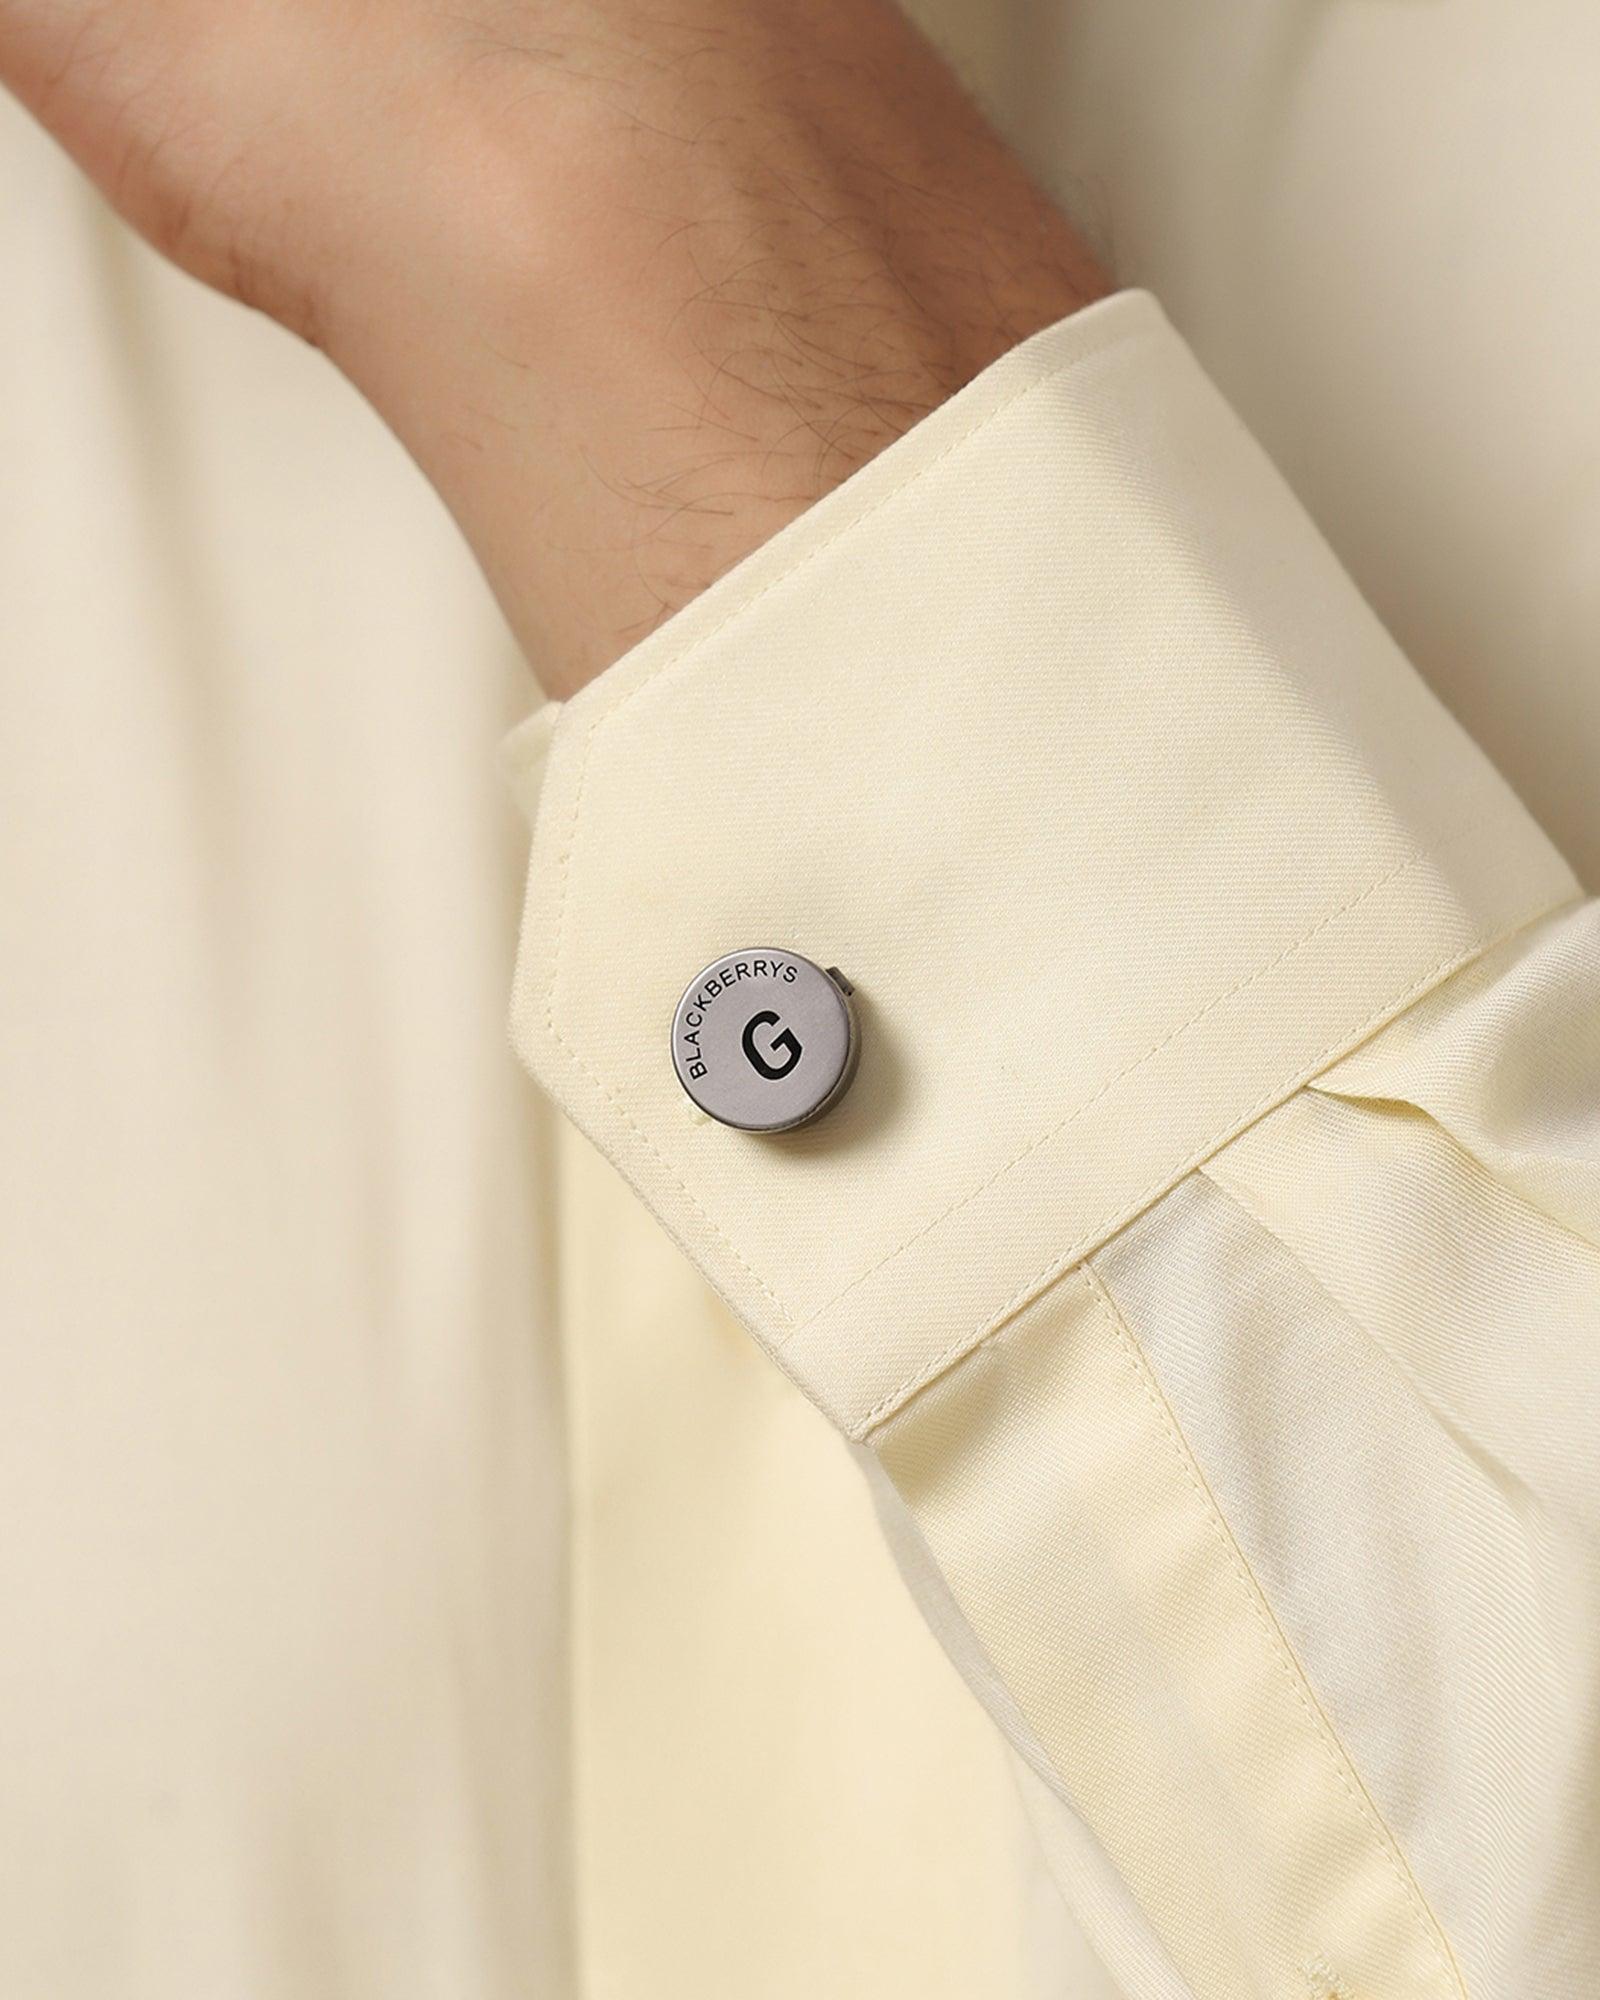 Personalised Shirt Button Cover With Alphabetic Initial-G